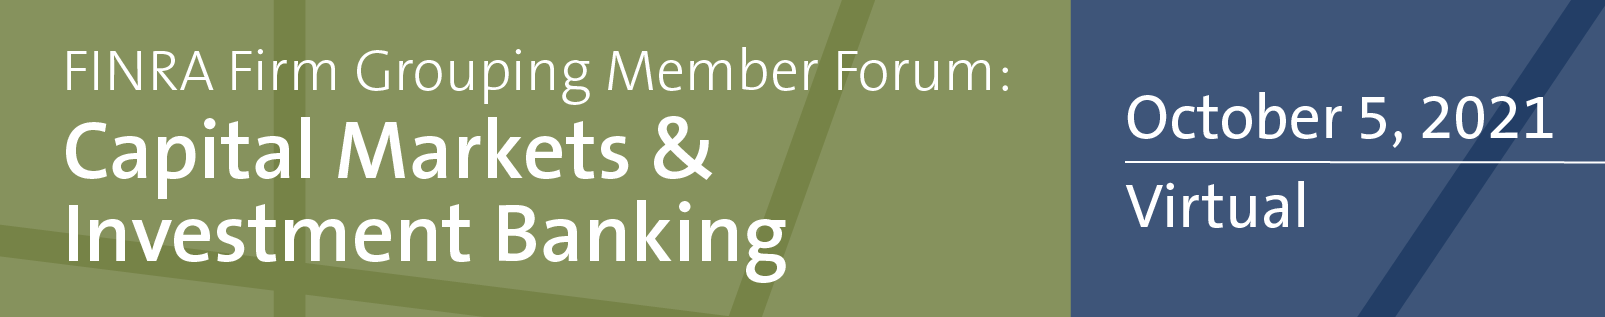 Event banner: FINRA Firm Grouping Member Forum: Capital Markets and Investment Banking October 5, 2021